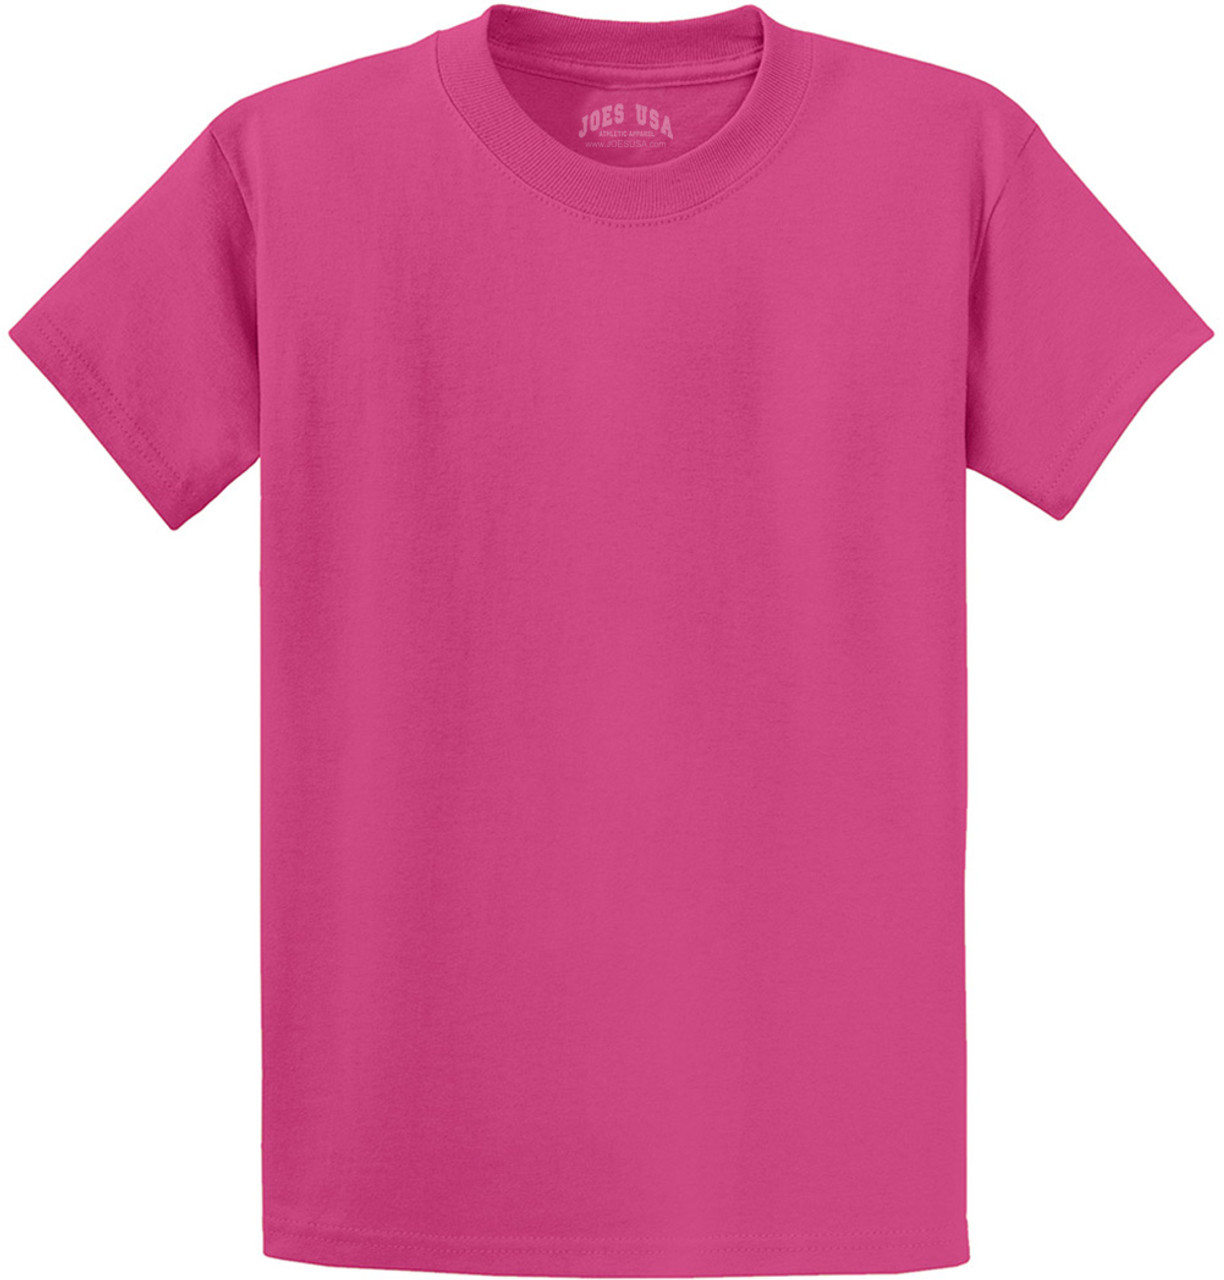 Joe's USA - 50/50 Cotton/Poly T-Shirts in 50 Colors, best selling cotton /  poly t-shirts